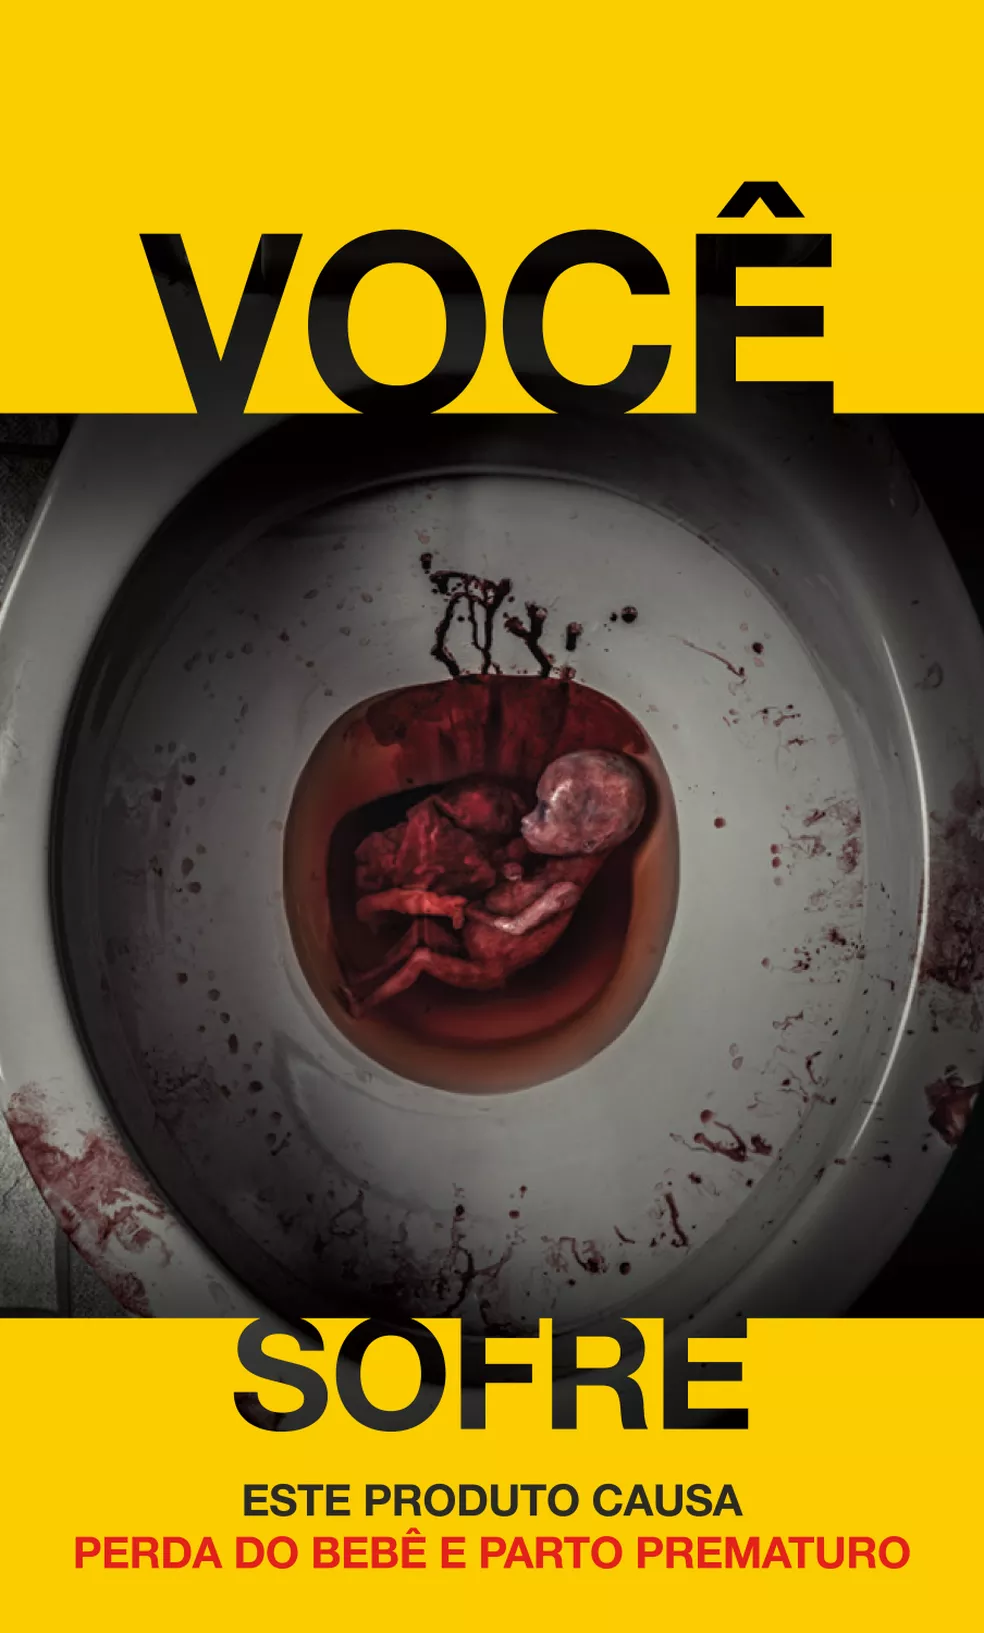 A bleeding red fetus inside a white porcelain toilet. Hollowed-out letters in a yellow background read "YOU SUFFER: this product causes miscarriages and premature birth"